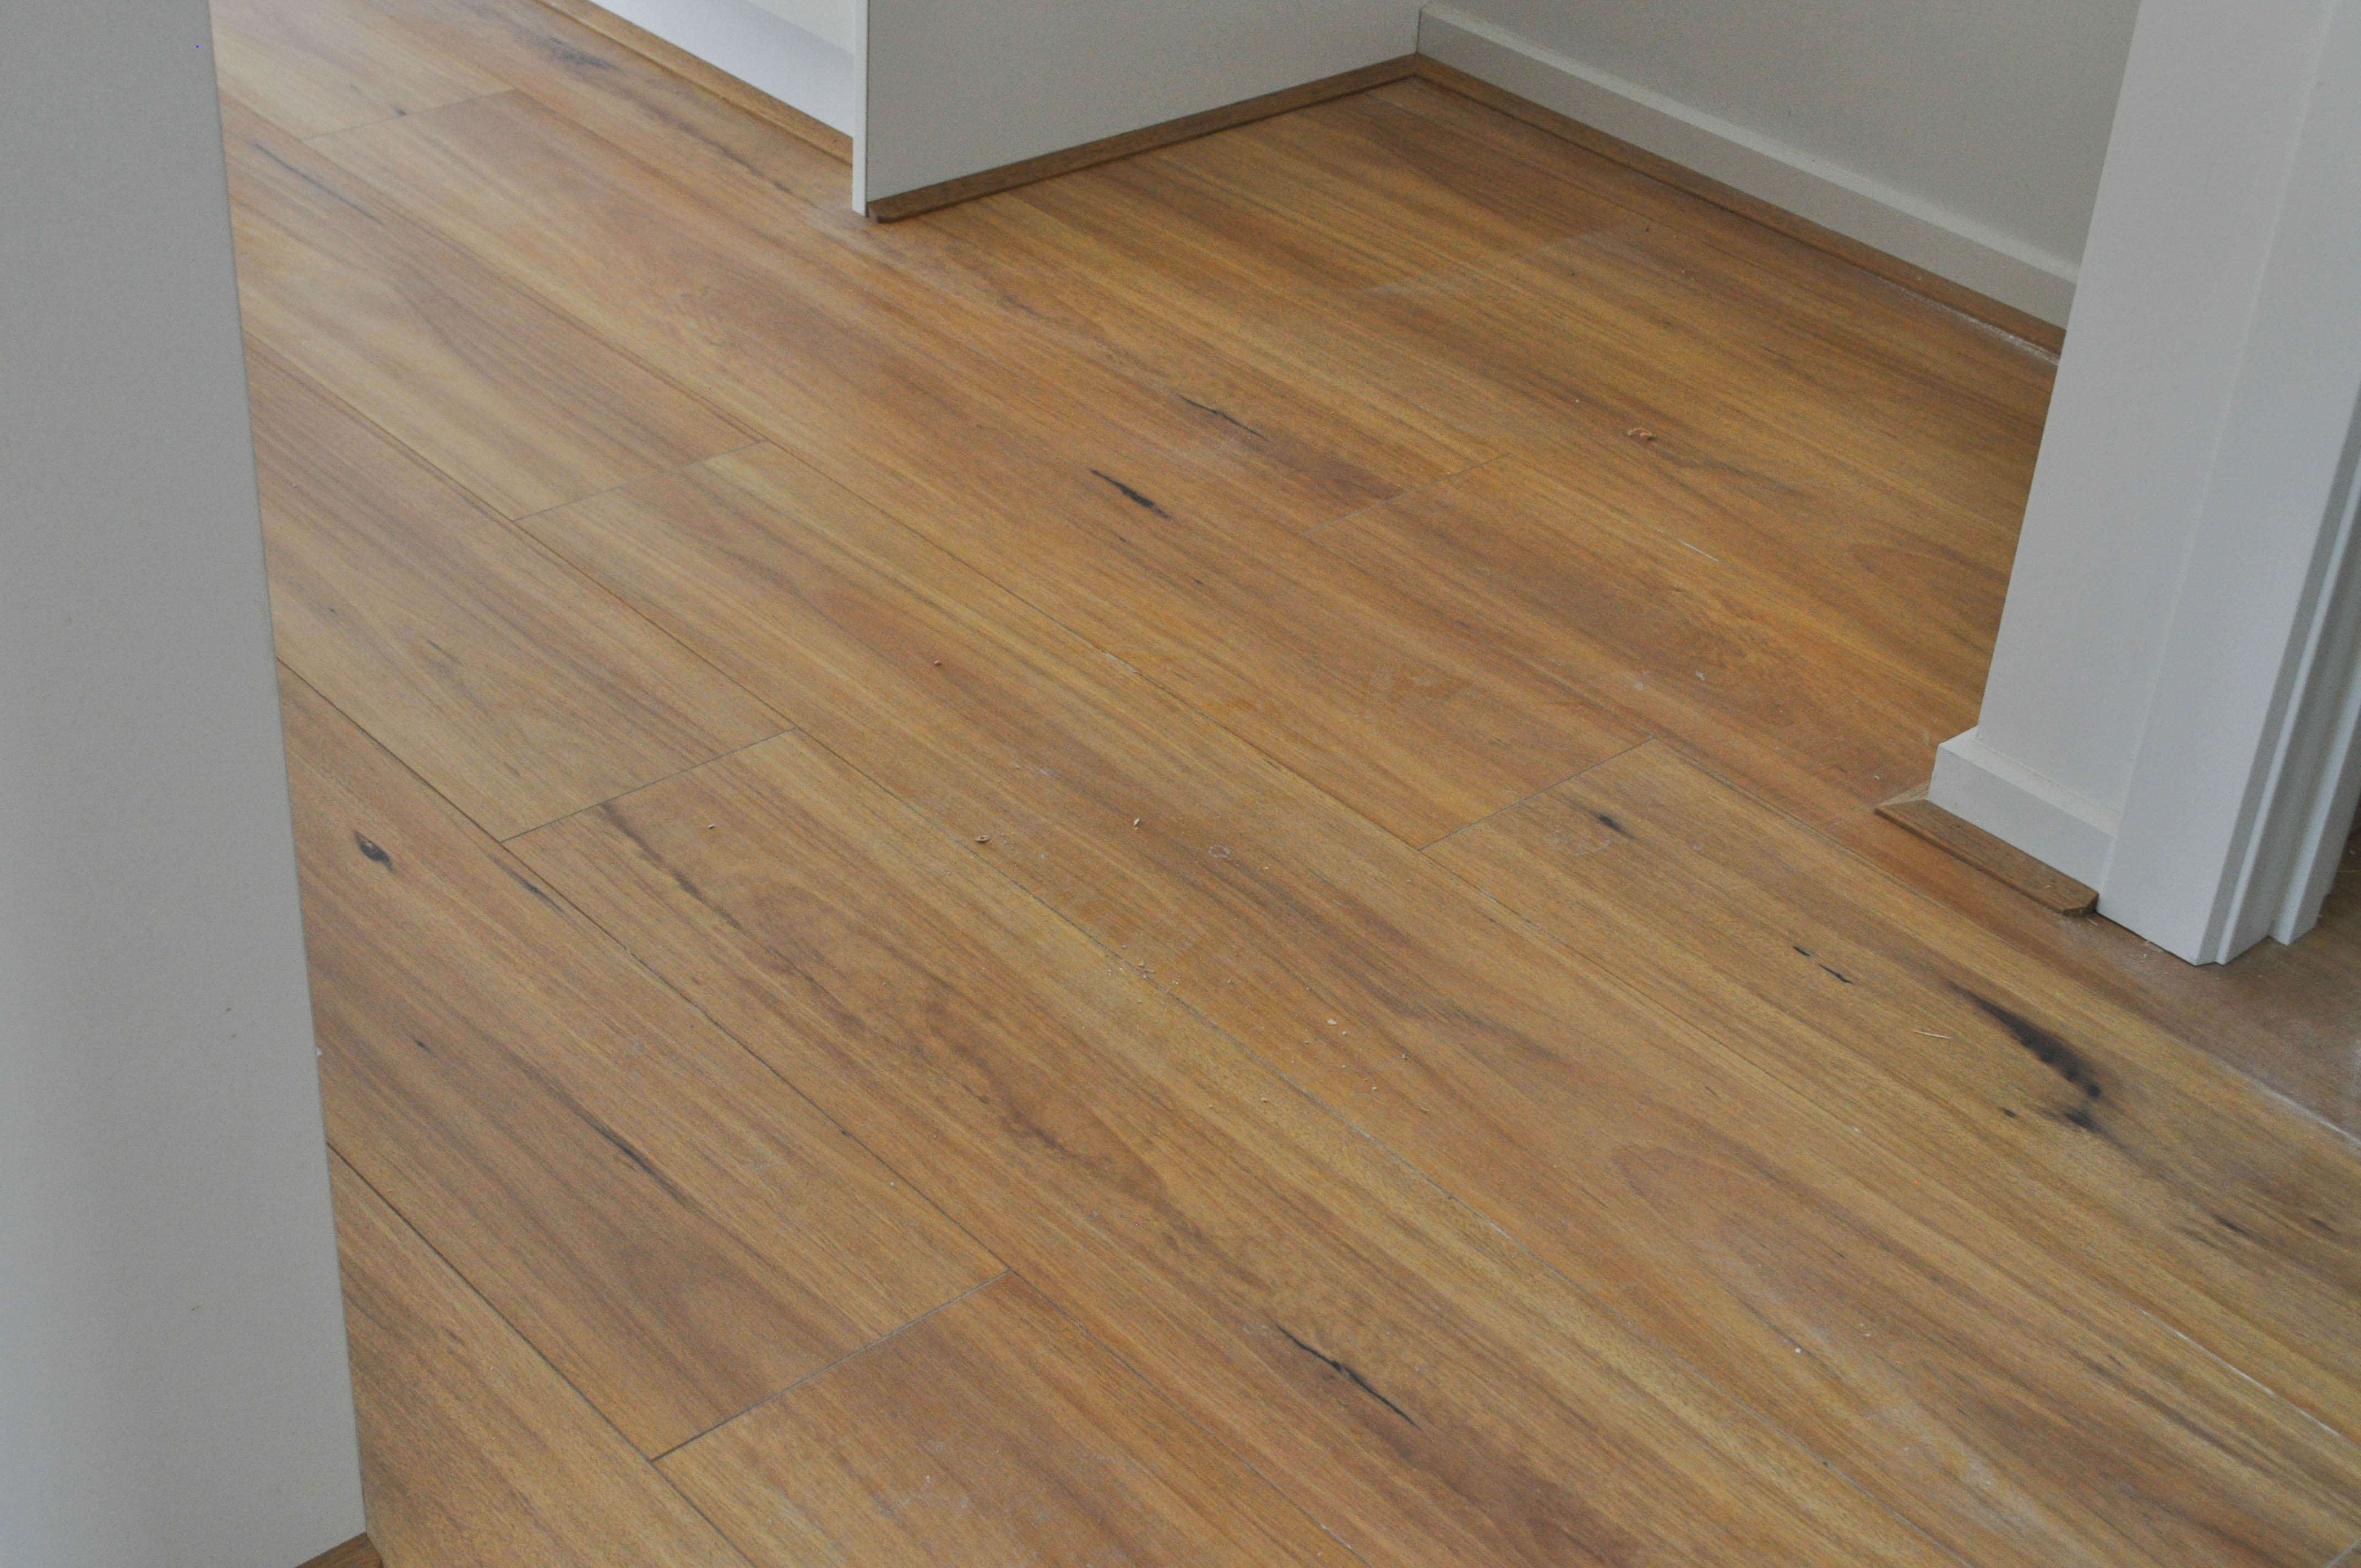 showing a kitchen inside a home where the floor has been floorboarded with cream colored laminate flooring.